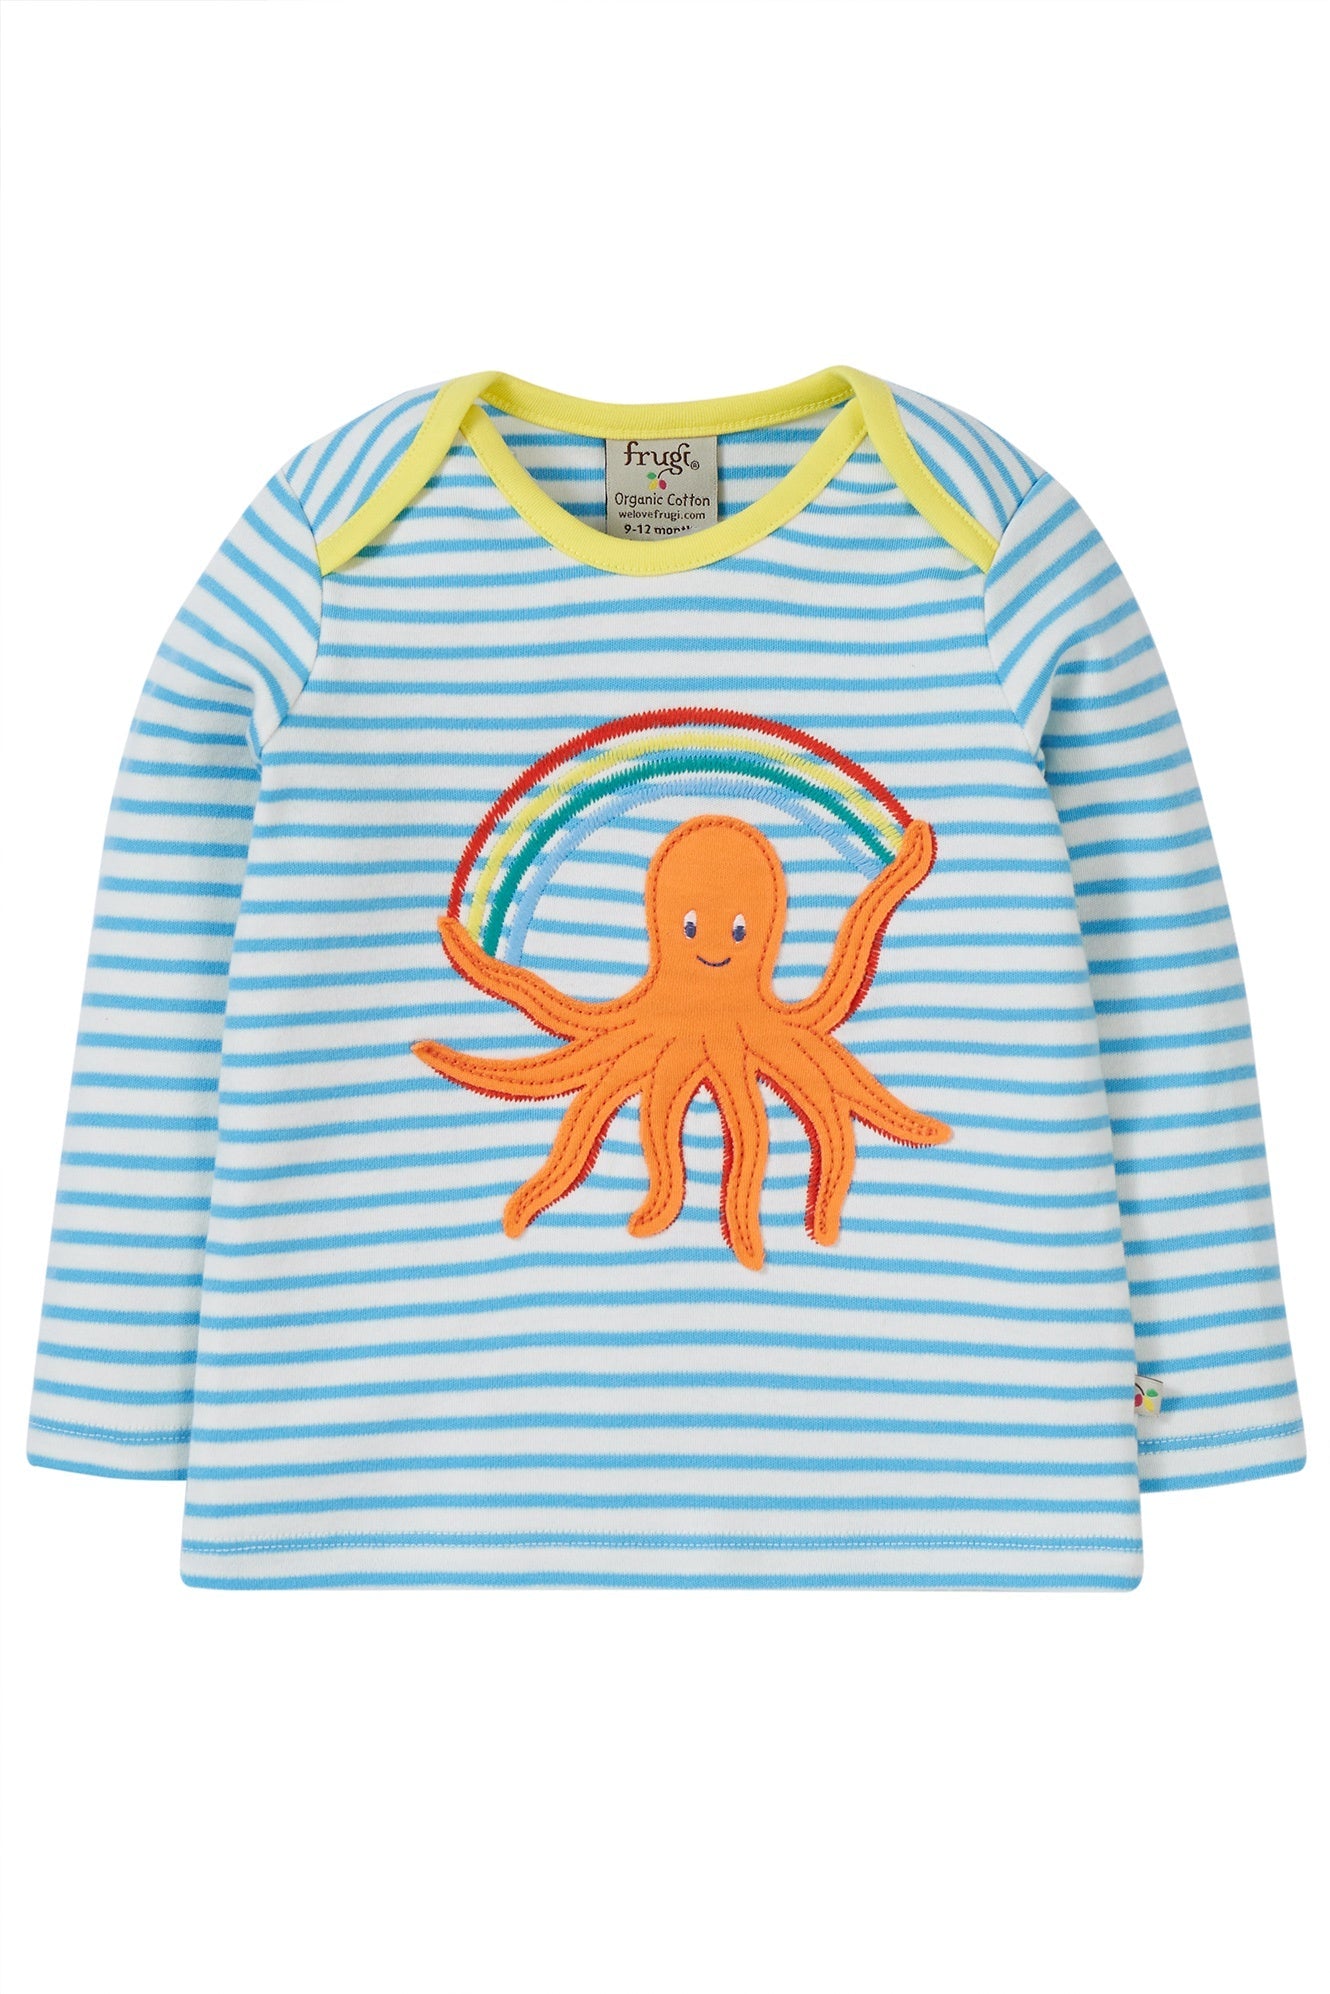 Frugi Bobby Applique Top in Beluga Blue Stripe/Octopus-Kids-Ohh! By Gum - Shop Sustainable